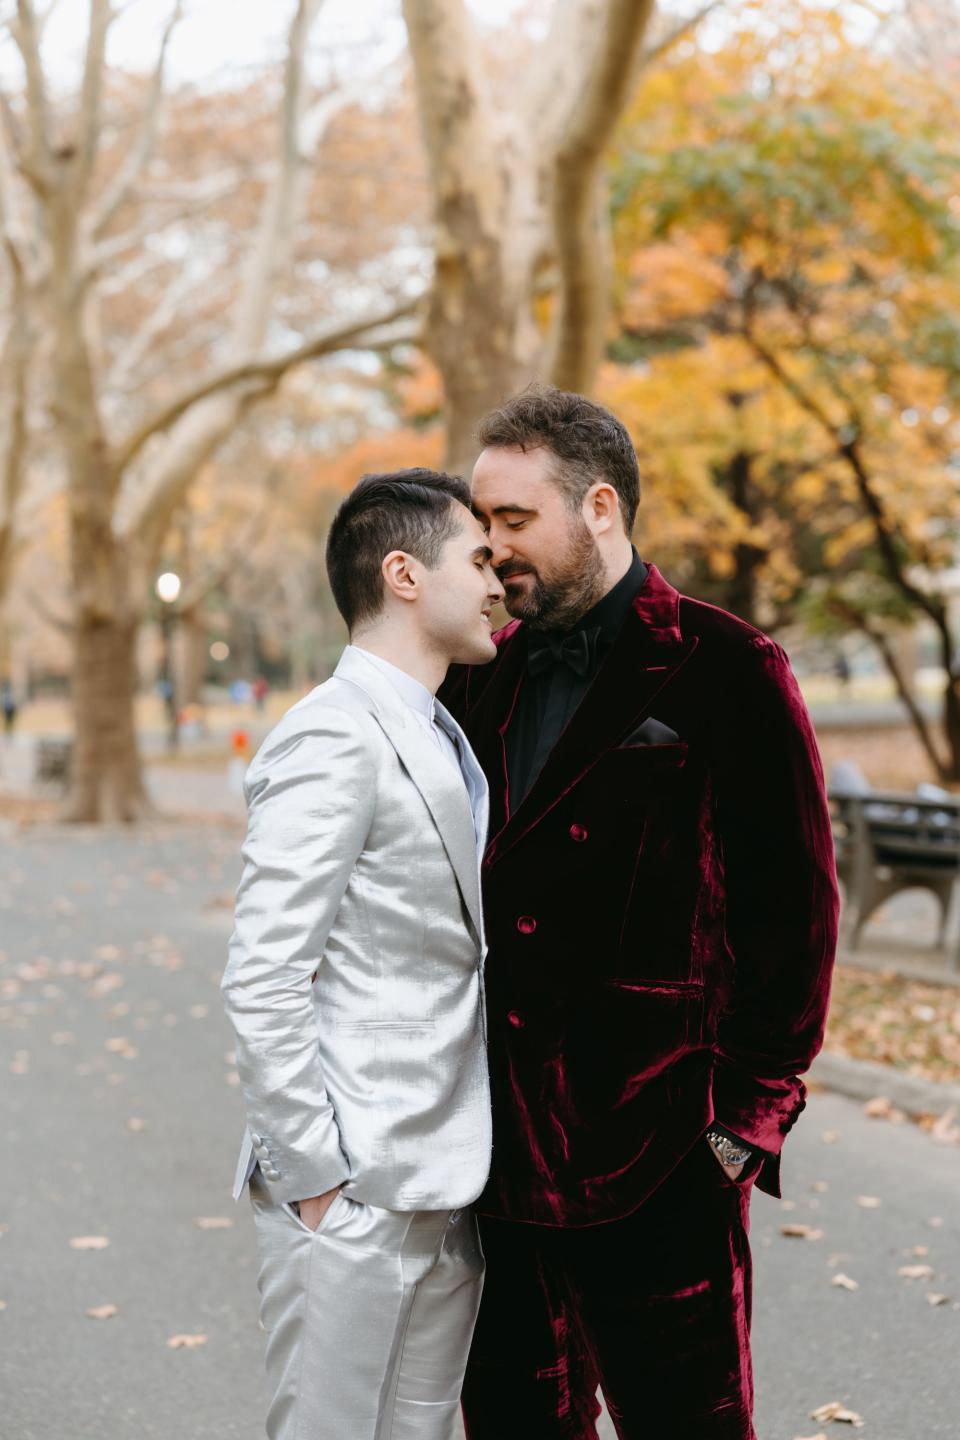 Two grooms lean their heads together in a park.